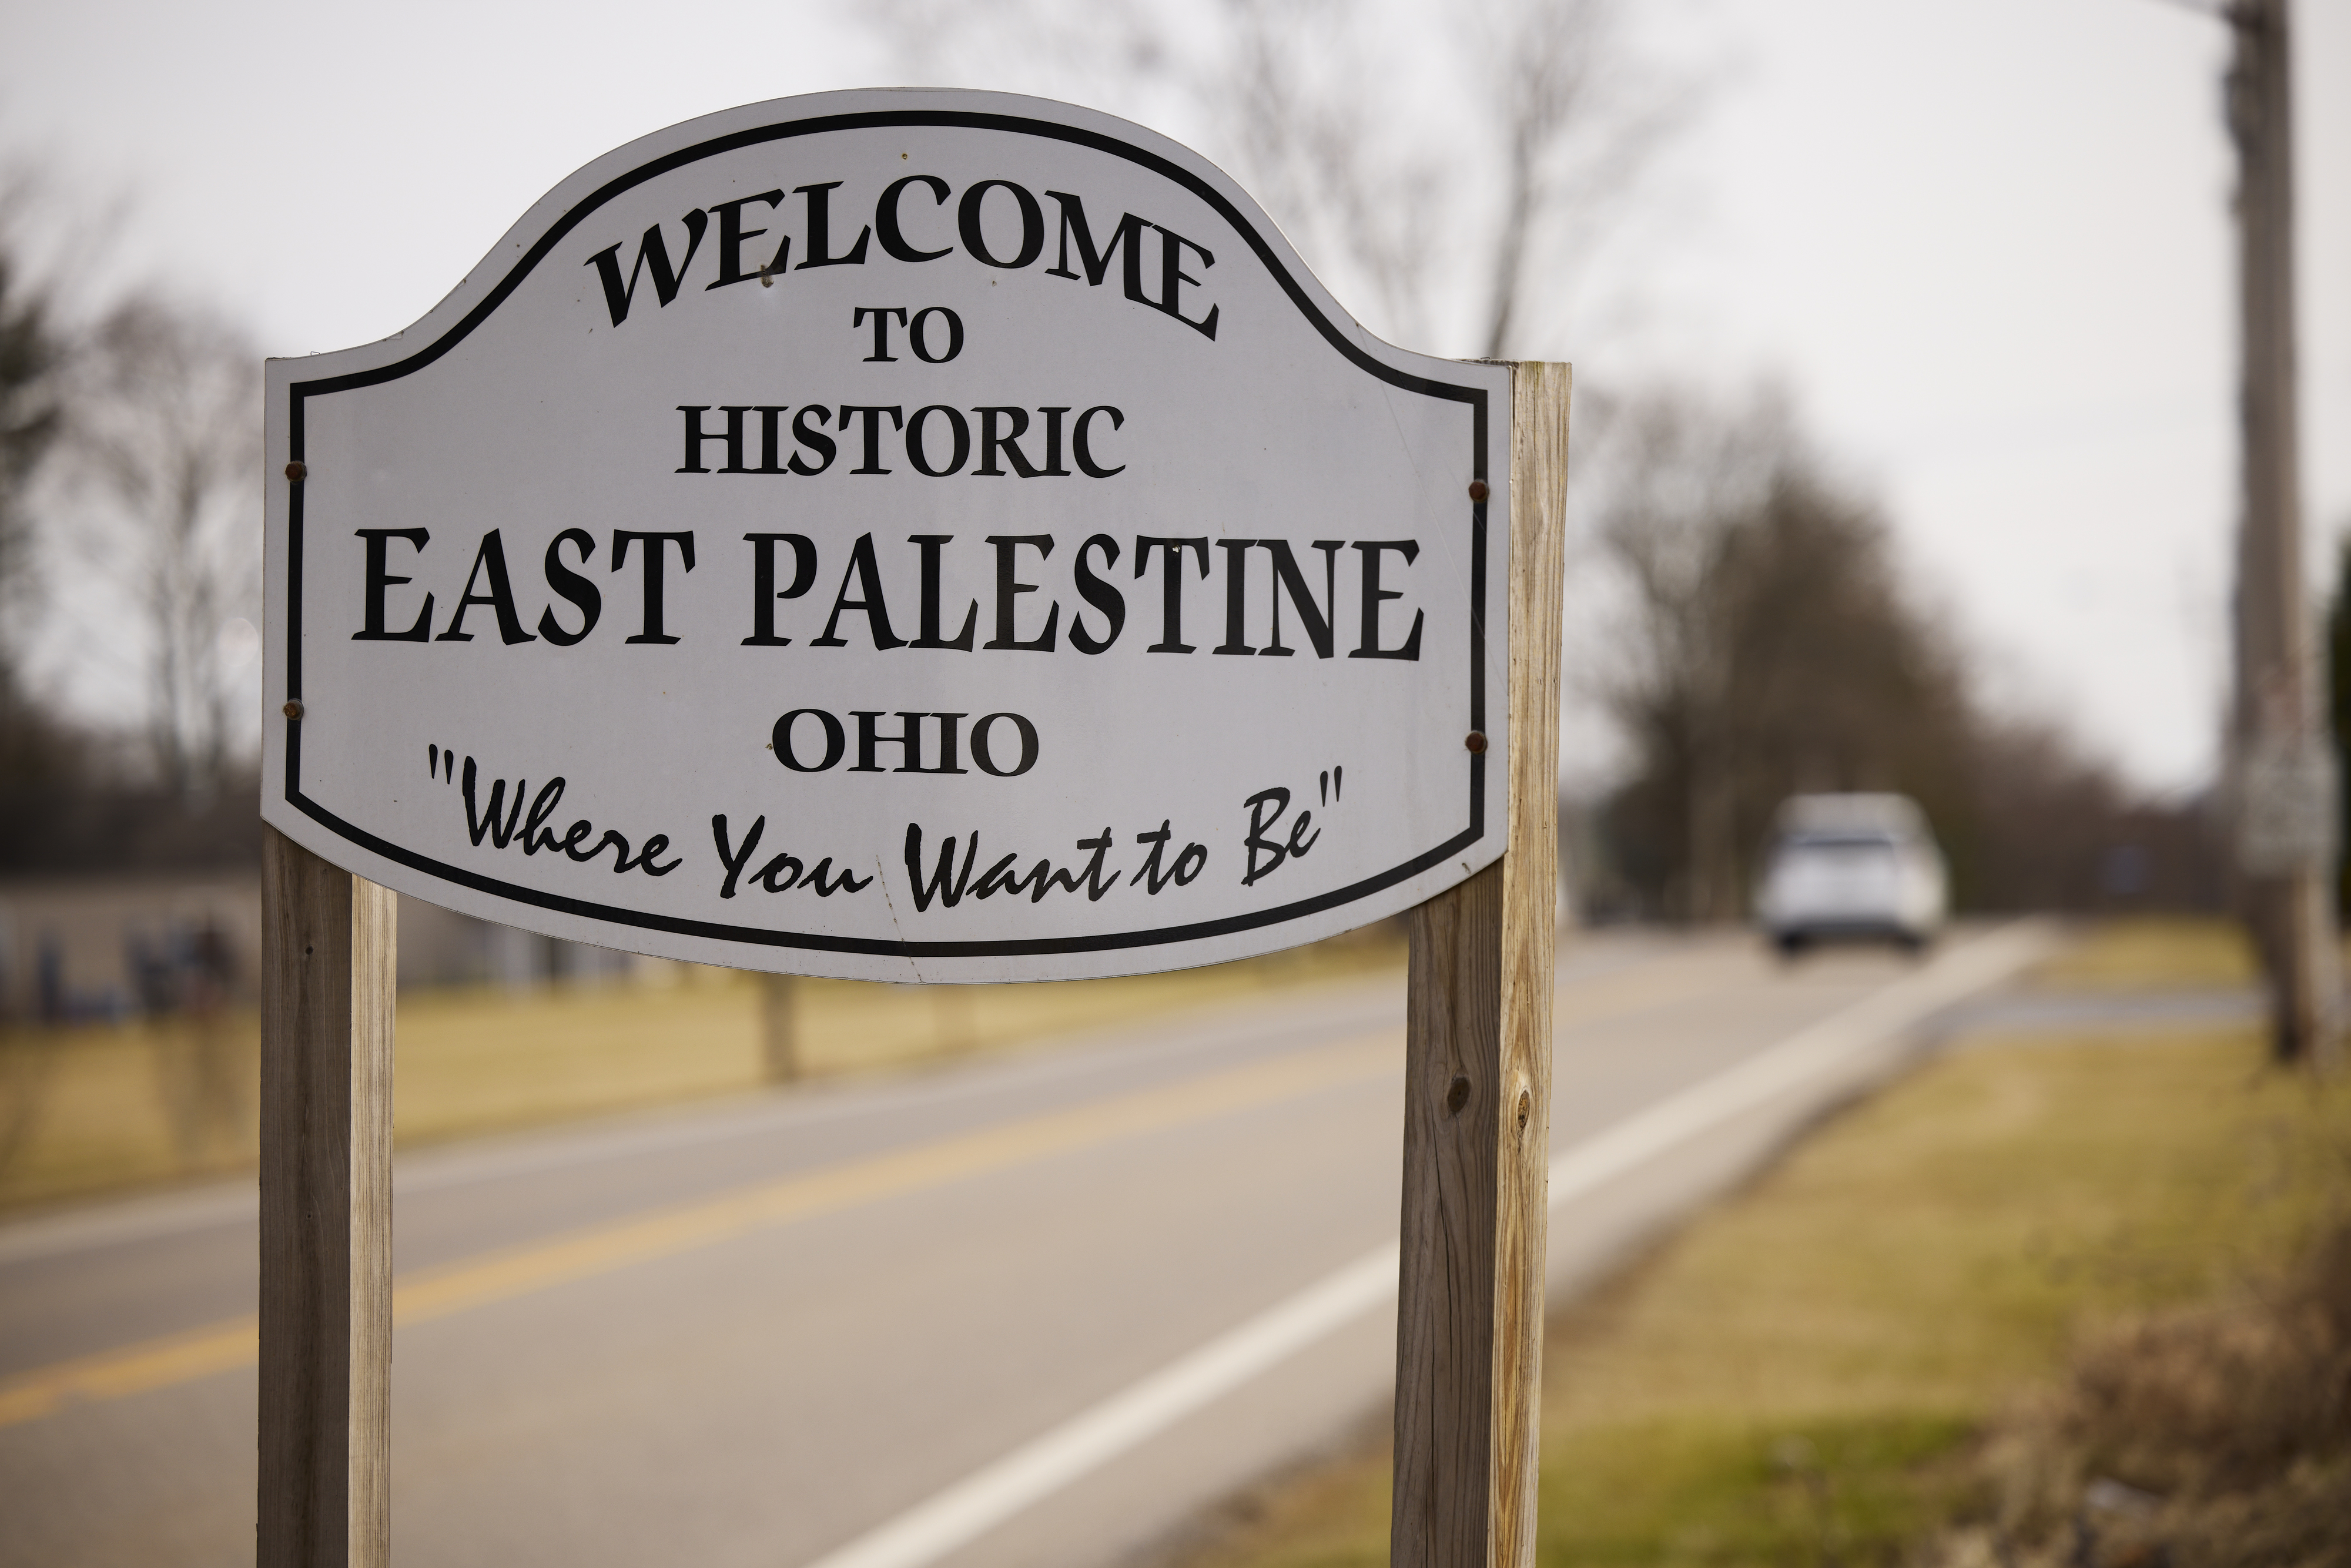 A sign welcomes visitors to the town of East Palestine, Ohio